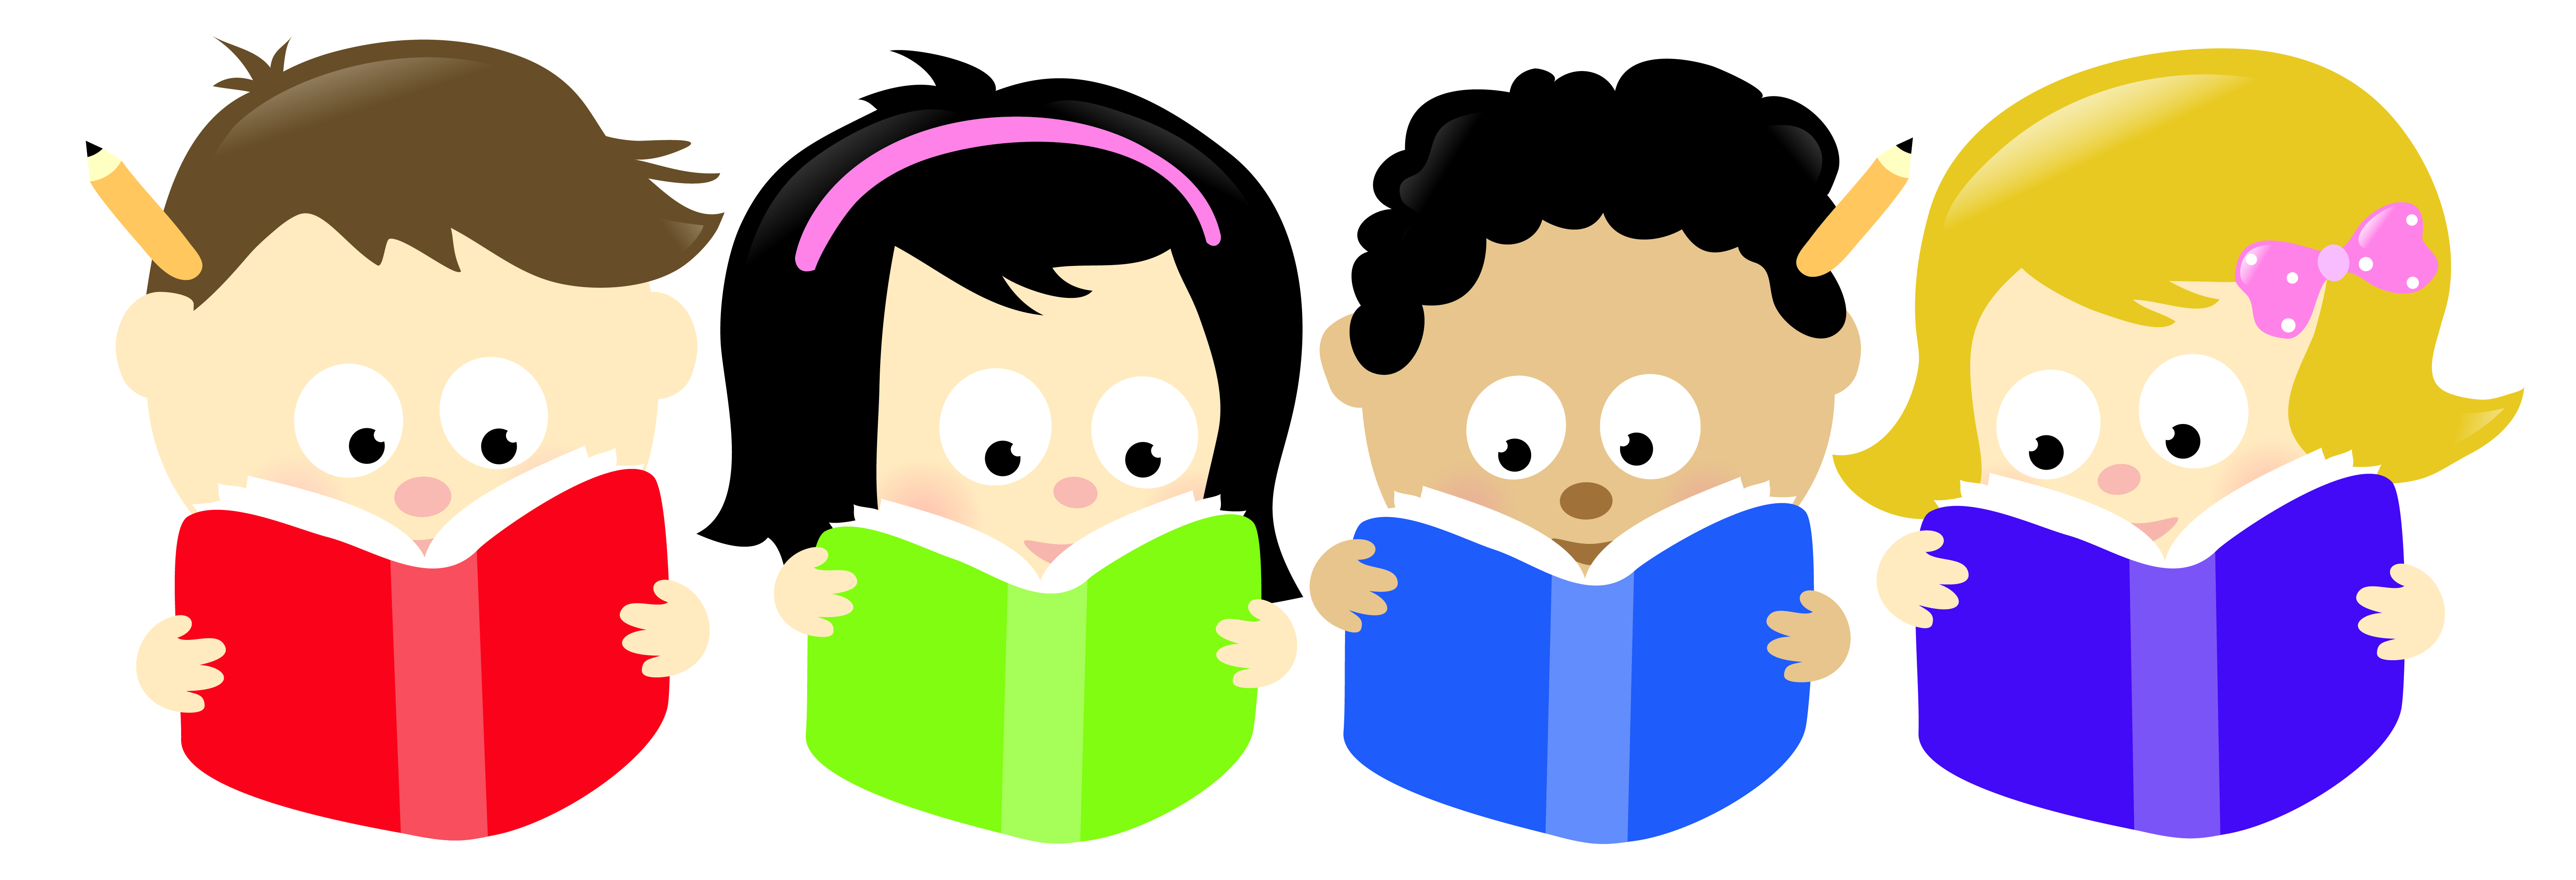 bookworm clipart storytime